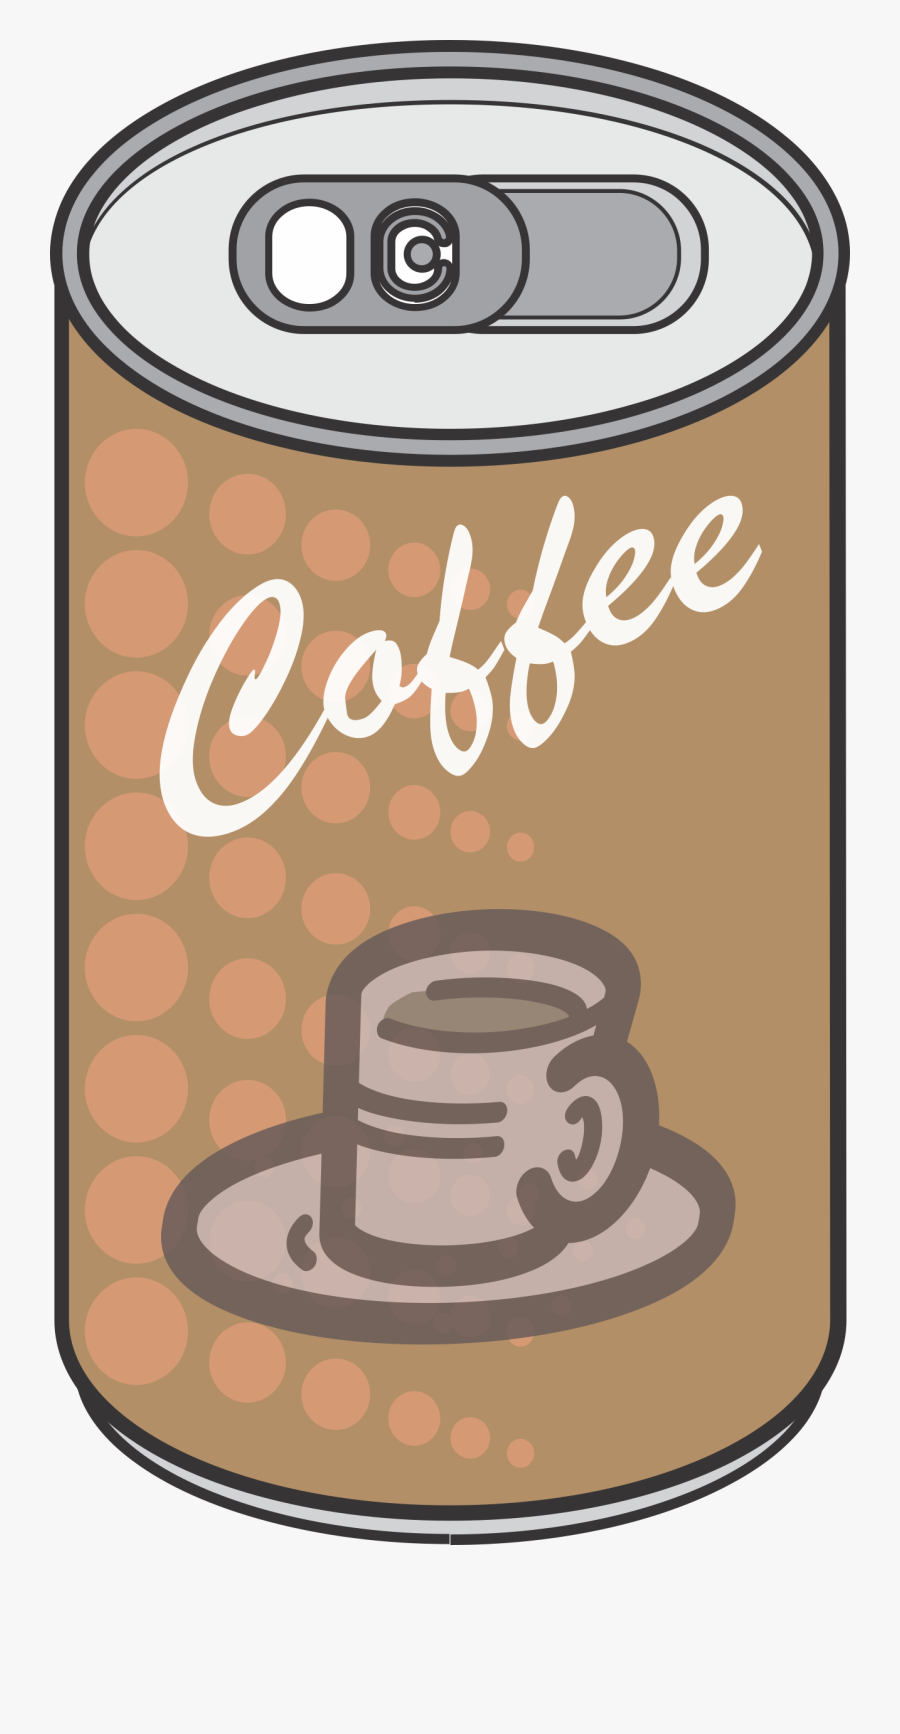 Transparent Canned Goods Clipart - Danny Coffee Bar Logo, Transparent Clipart